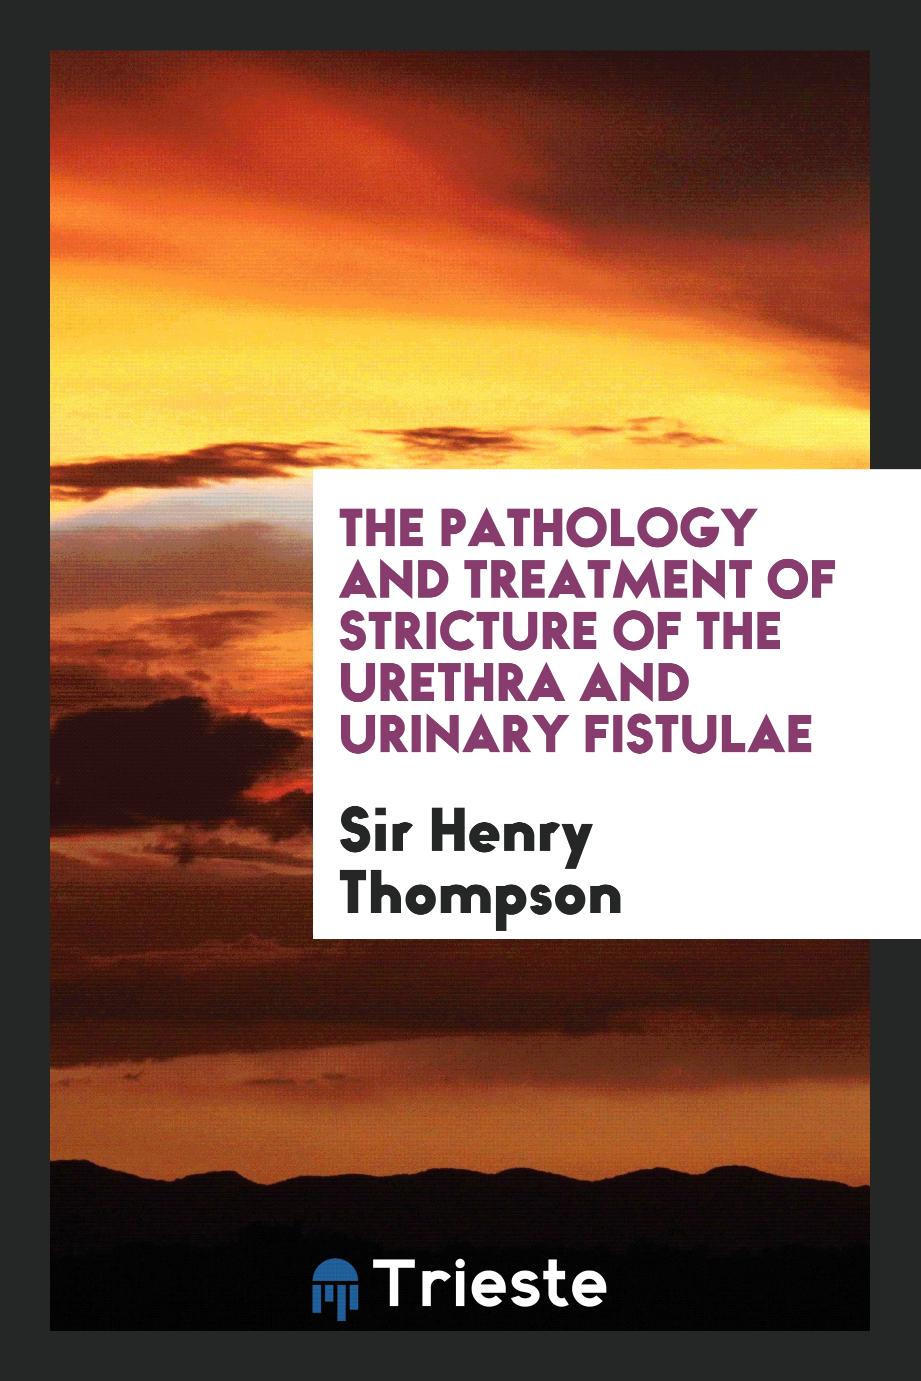 The Pathology and Treatment of Stricture of the Urethra and Urinary Fistulae